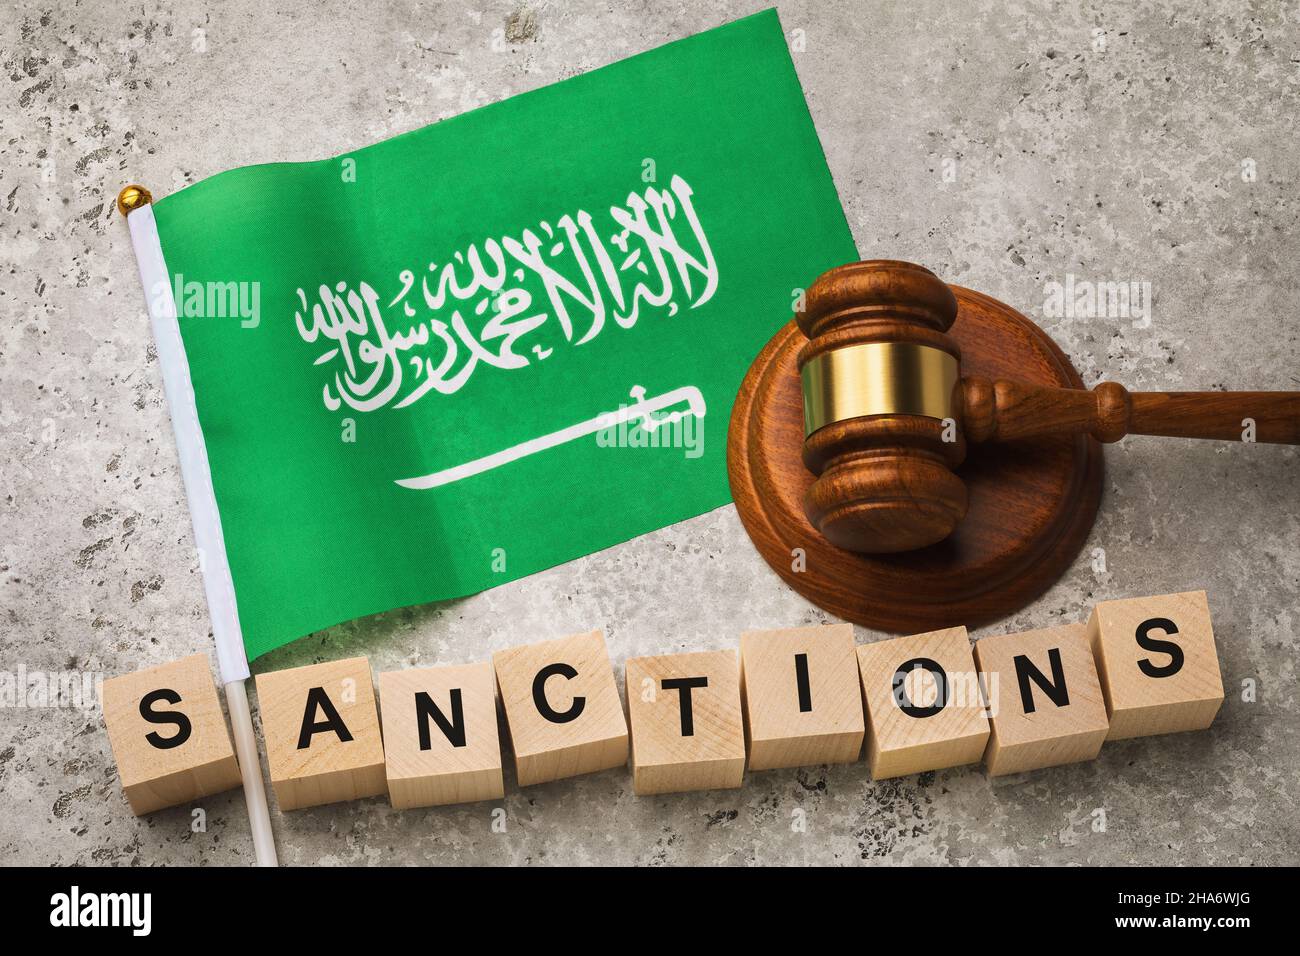 Saudi Arabia flag, Judge hammer and wooden cubes with text, concept on the theme of country sanctions Stock Photo